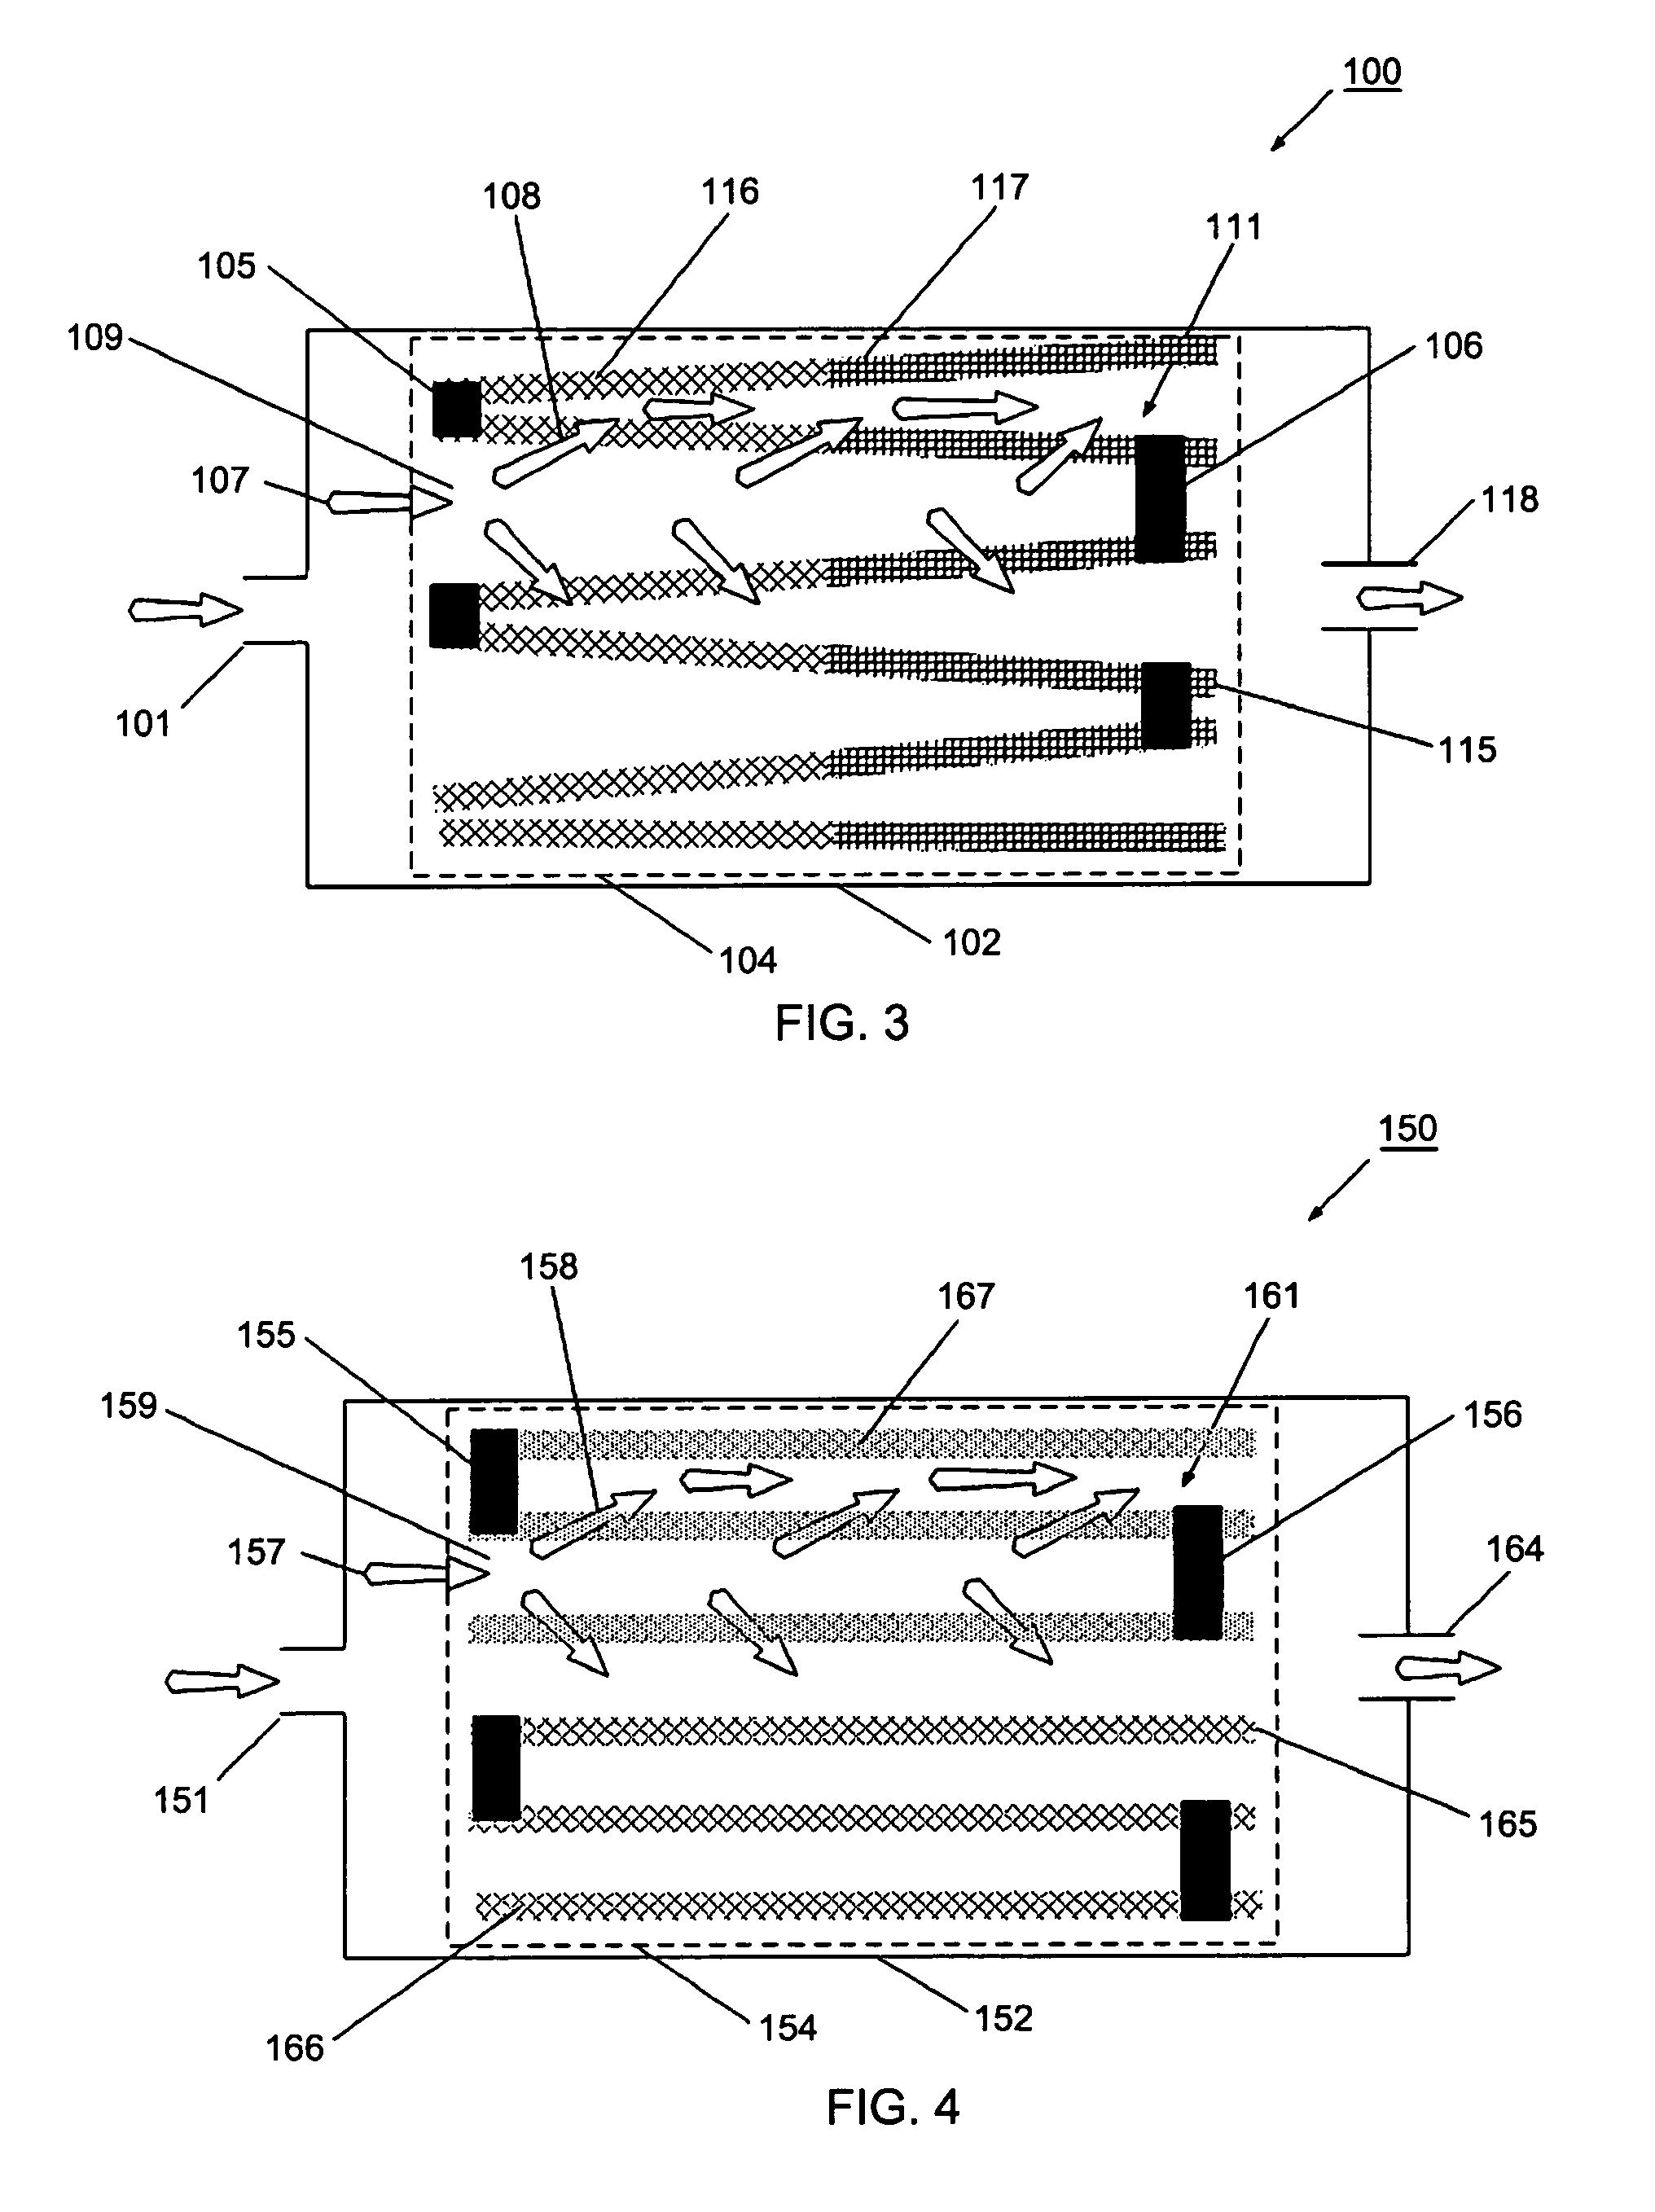 Highly porous mullite particulate filter substrate